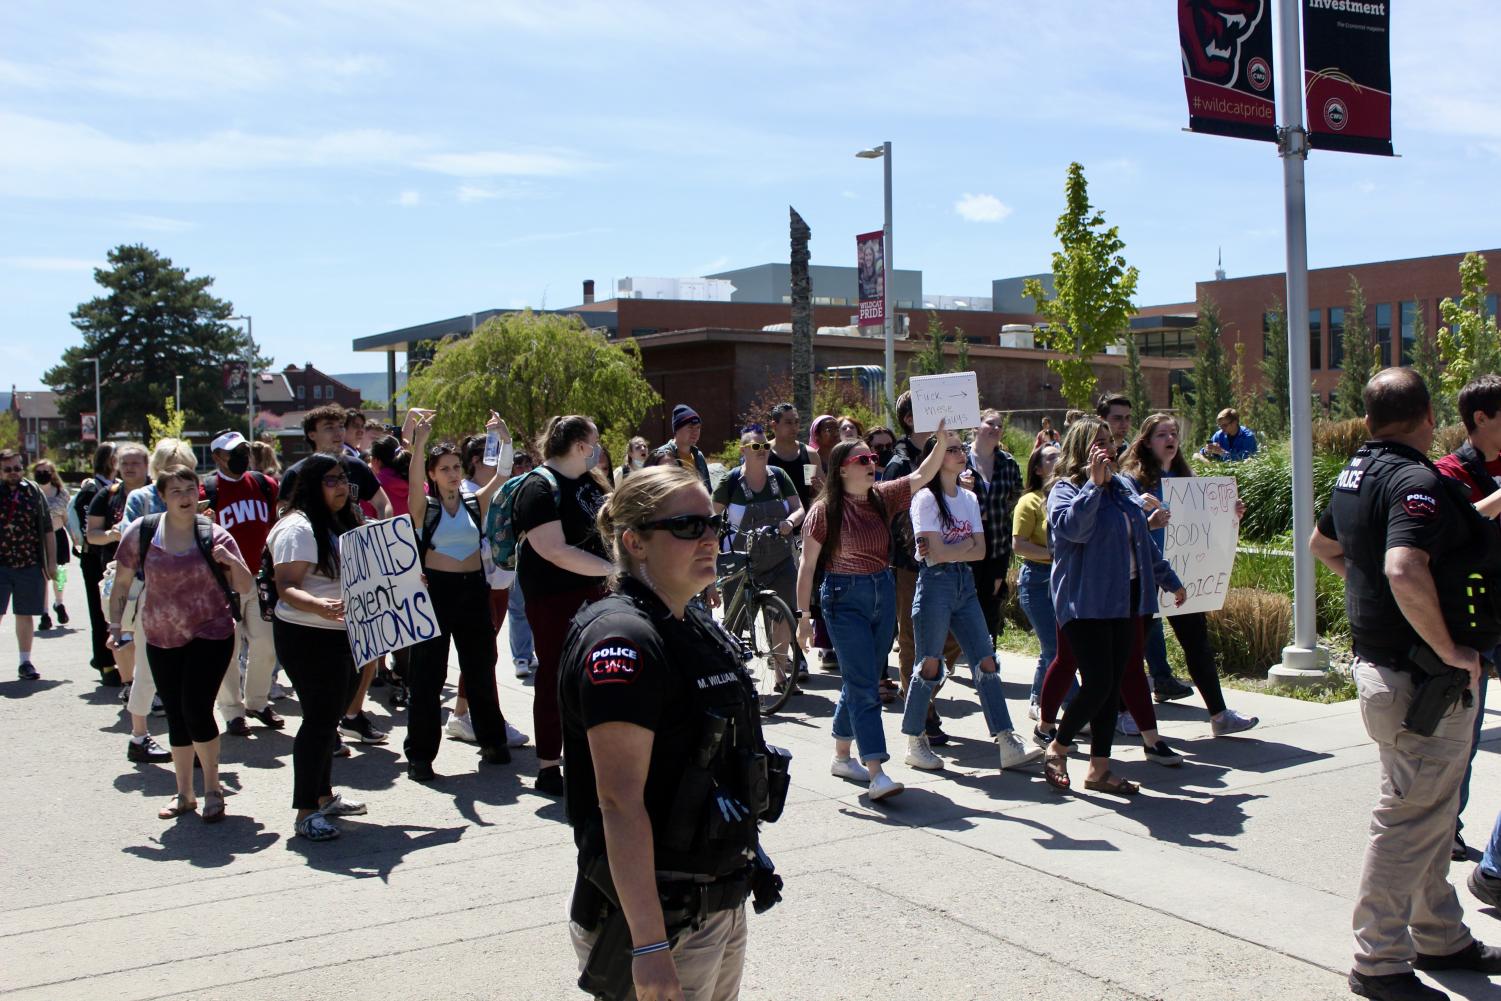 Anti-abortion+and+abortion-rights+protesters+gathered+in+opposition+on+campus